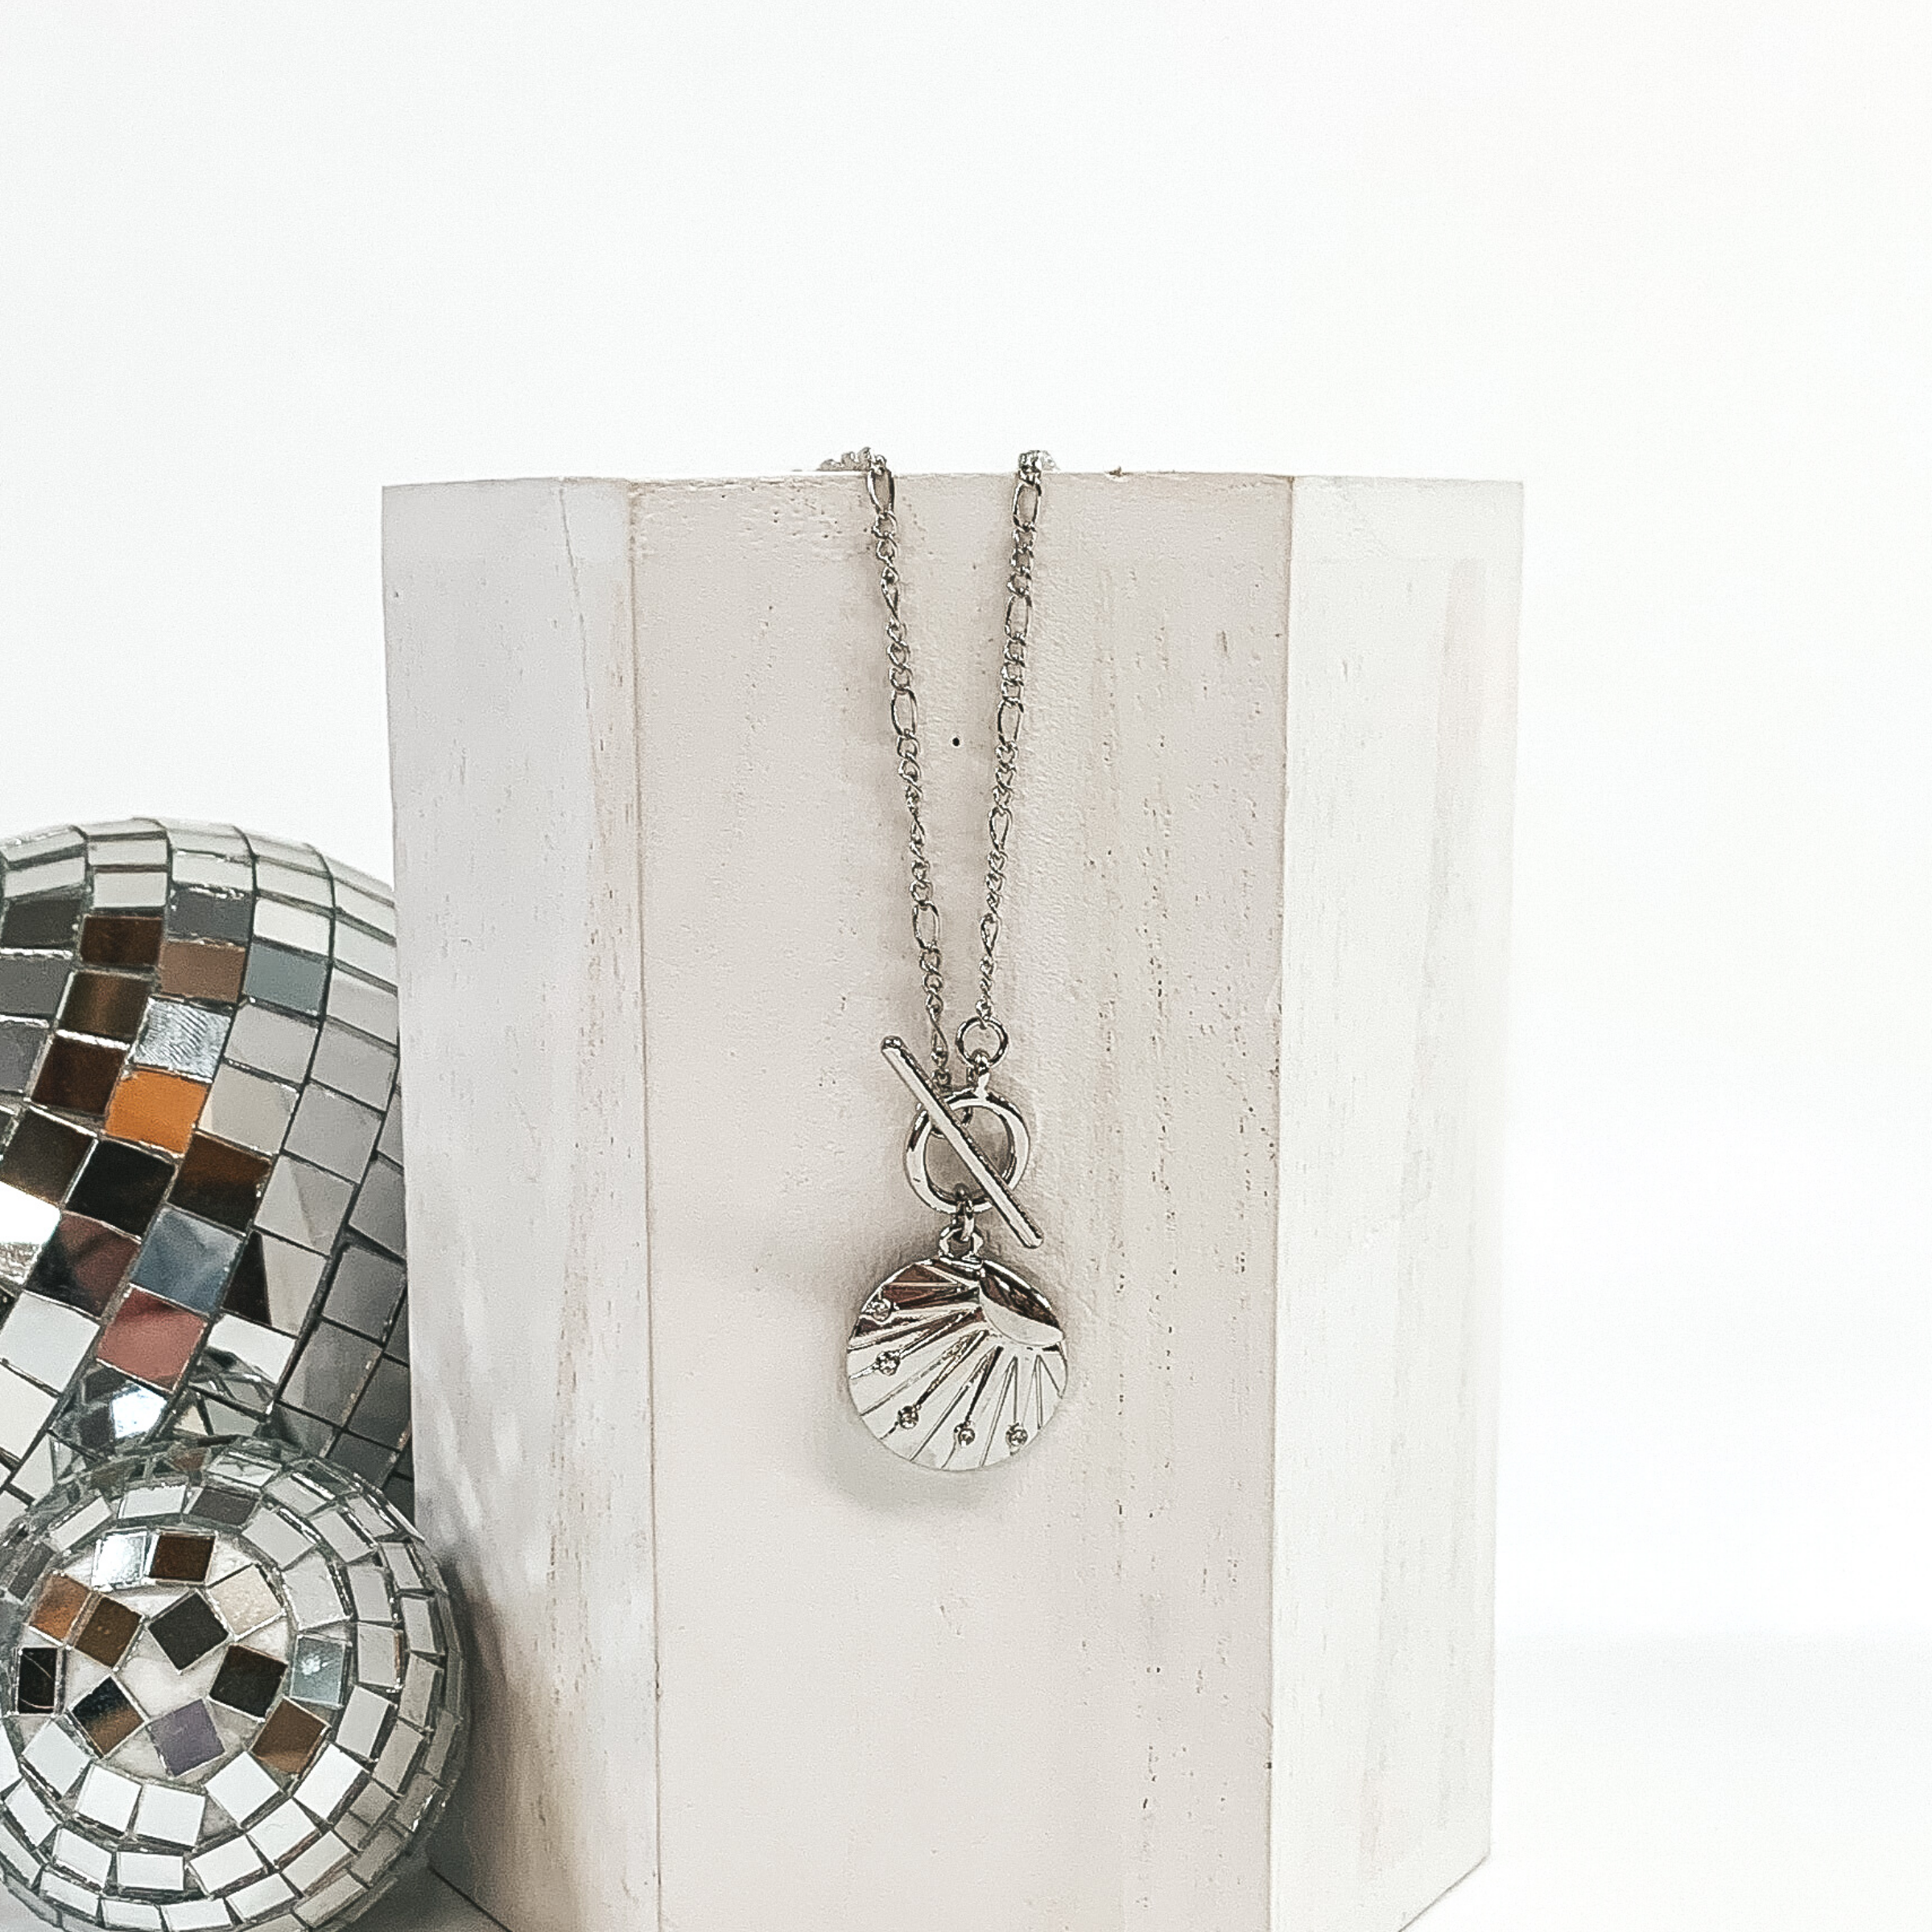 This is a silver necklace with a shell textured circle pendant with a sun design on it with a front toggle clasp. This necklace is pictured laying on a white block and on a white background with disco balls on the left side of the block.